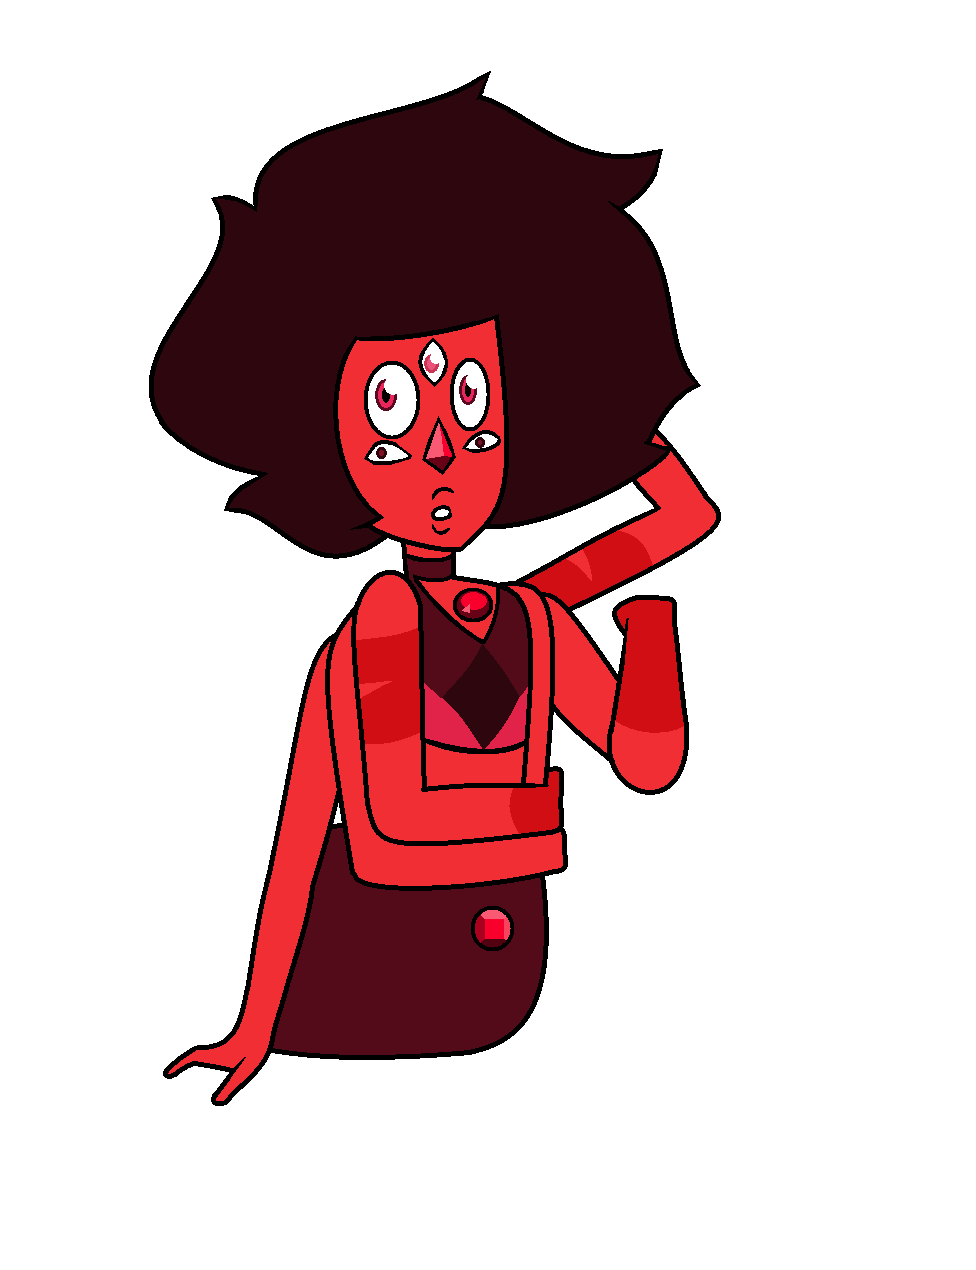 Anonymous said: Malachite and Rhodonite? Answer: Alacranite (This is pretty old and her body isn’t completed)